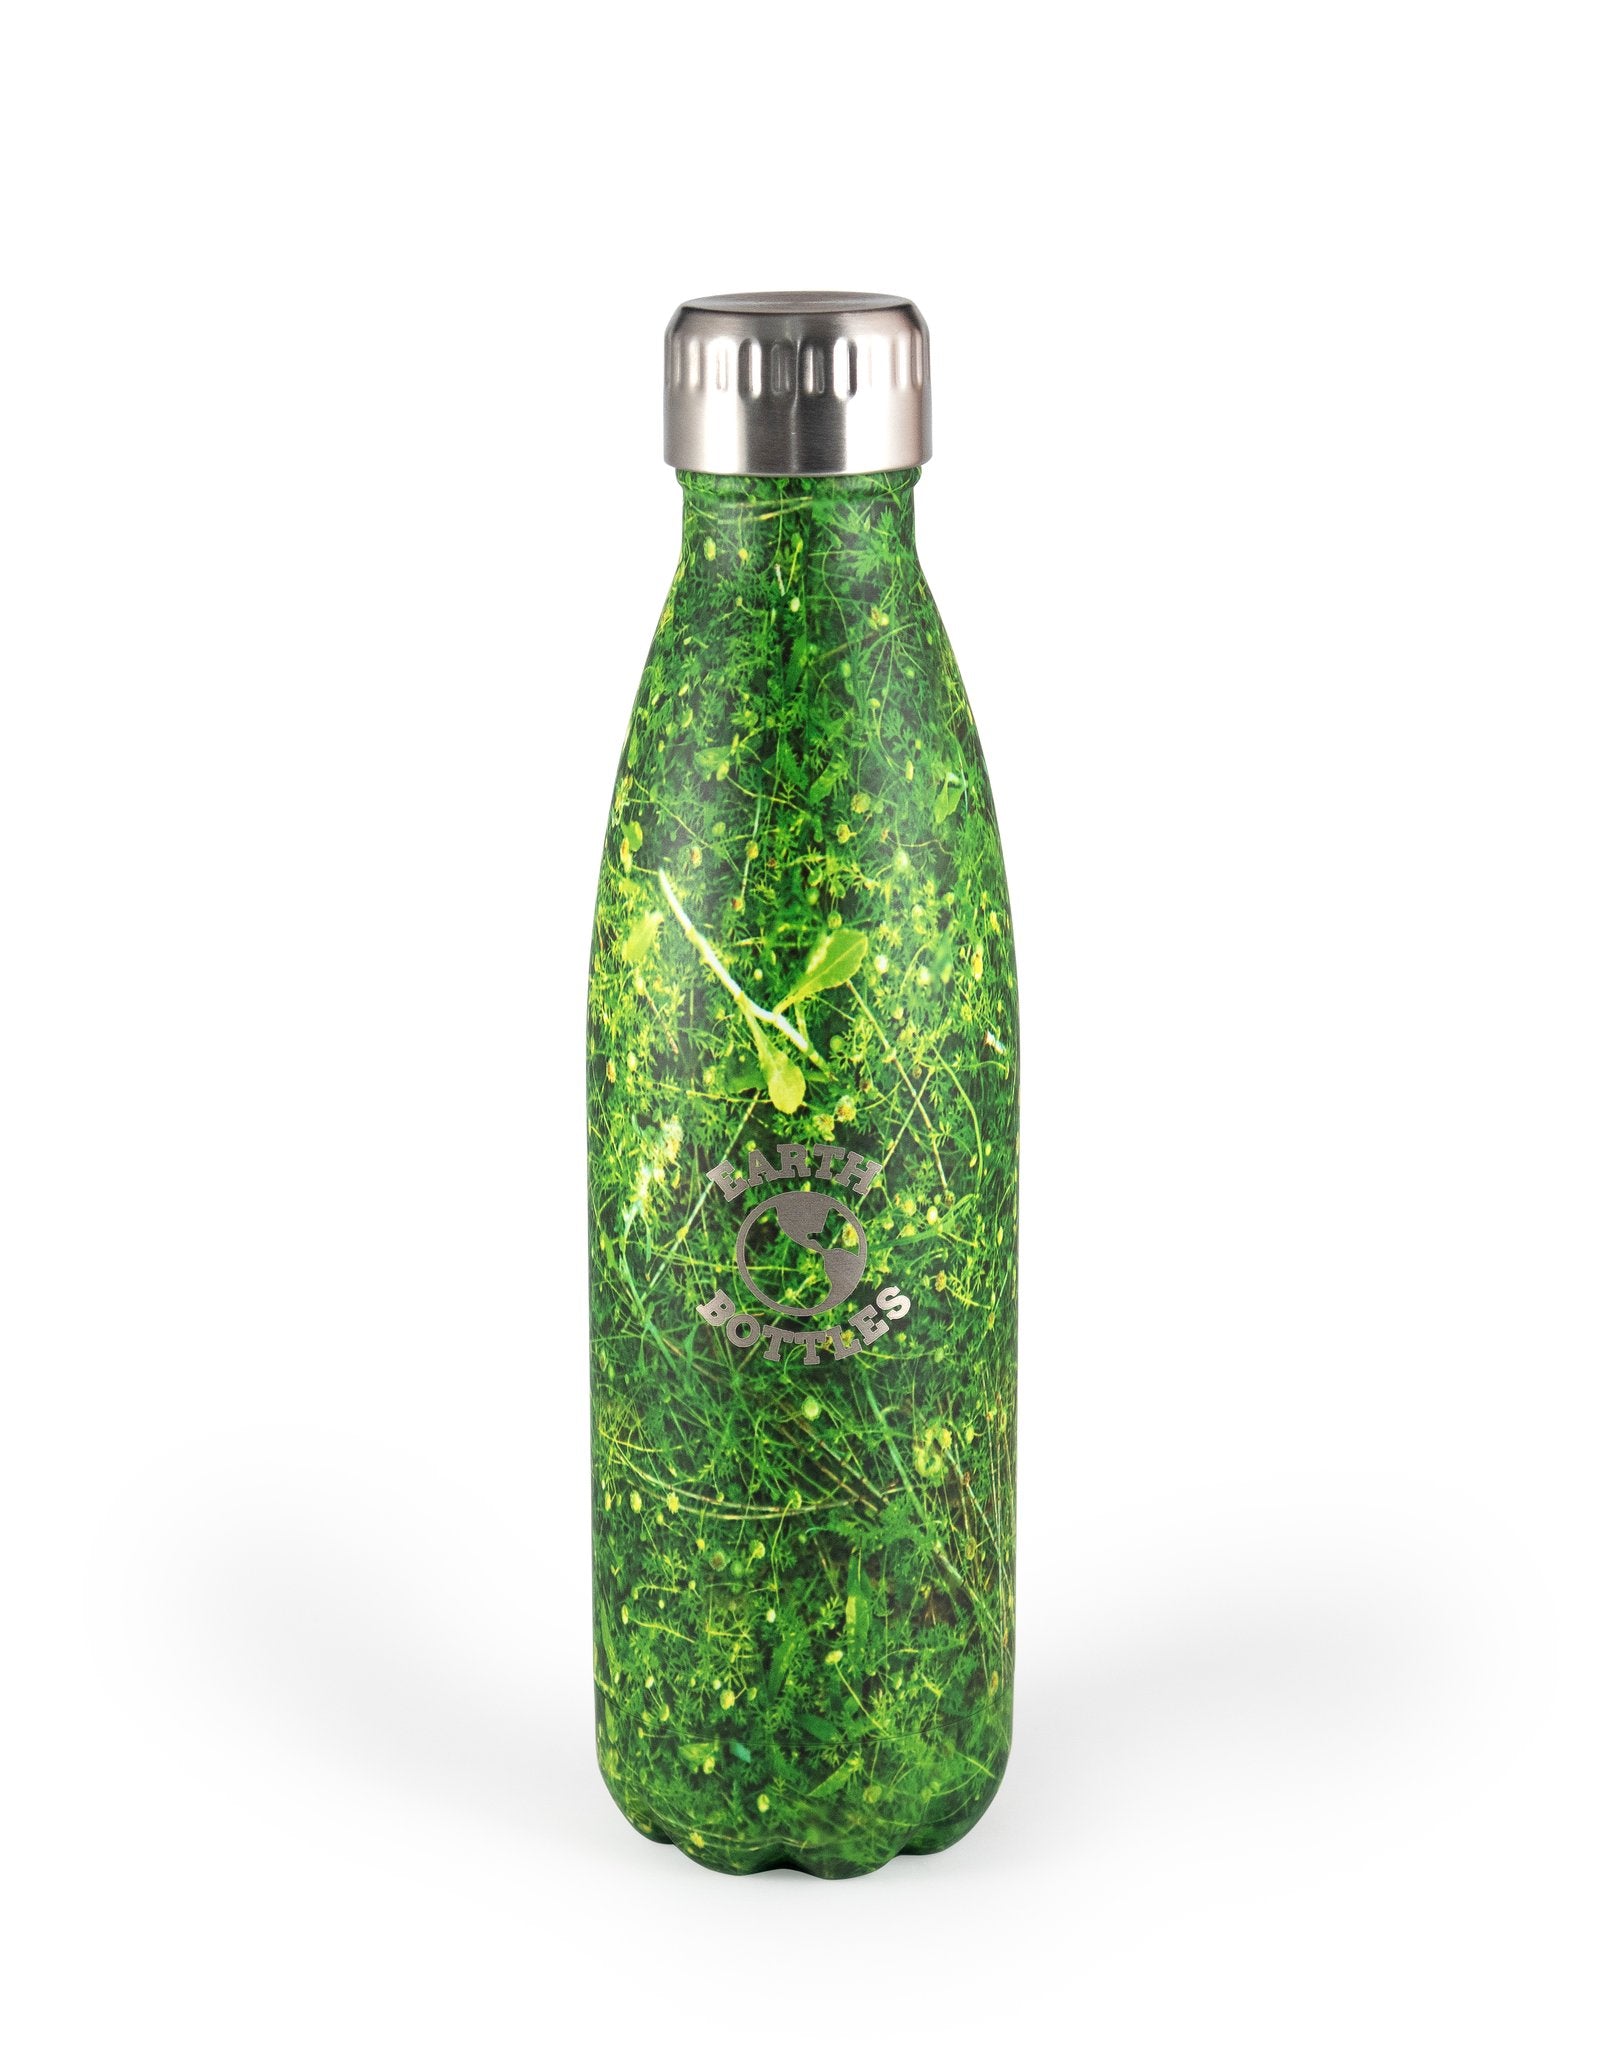 Sustainable Alternatives to Cups and Bottles – Say Goodbye to Disposable!